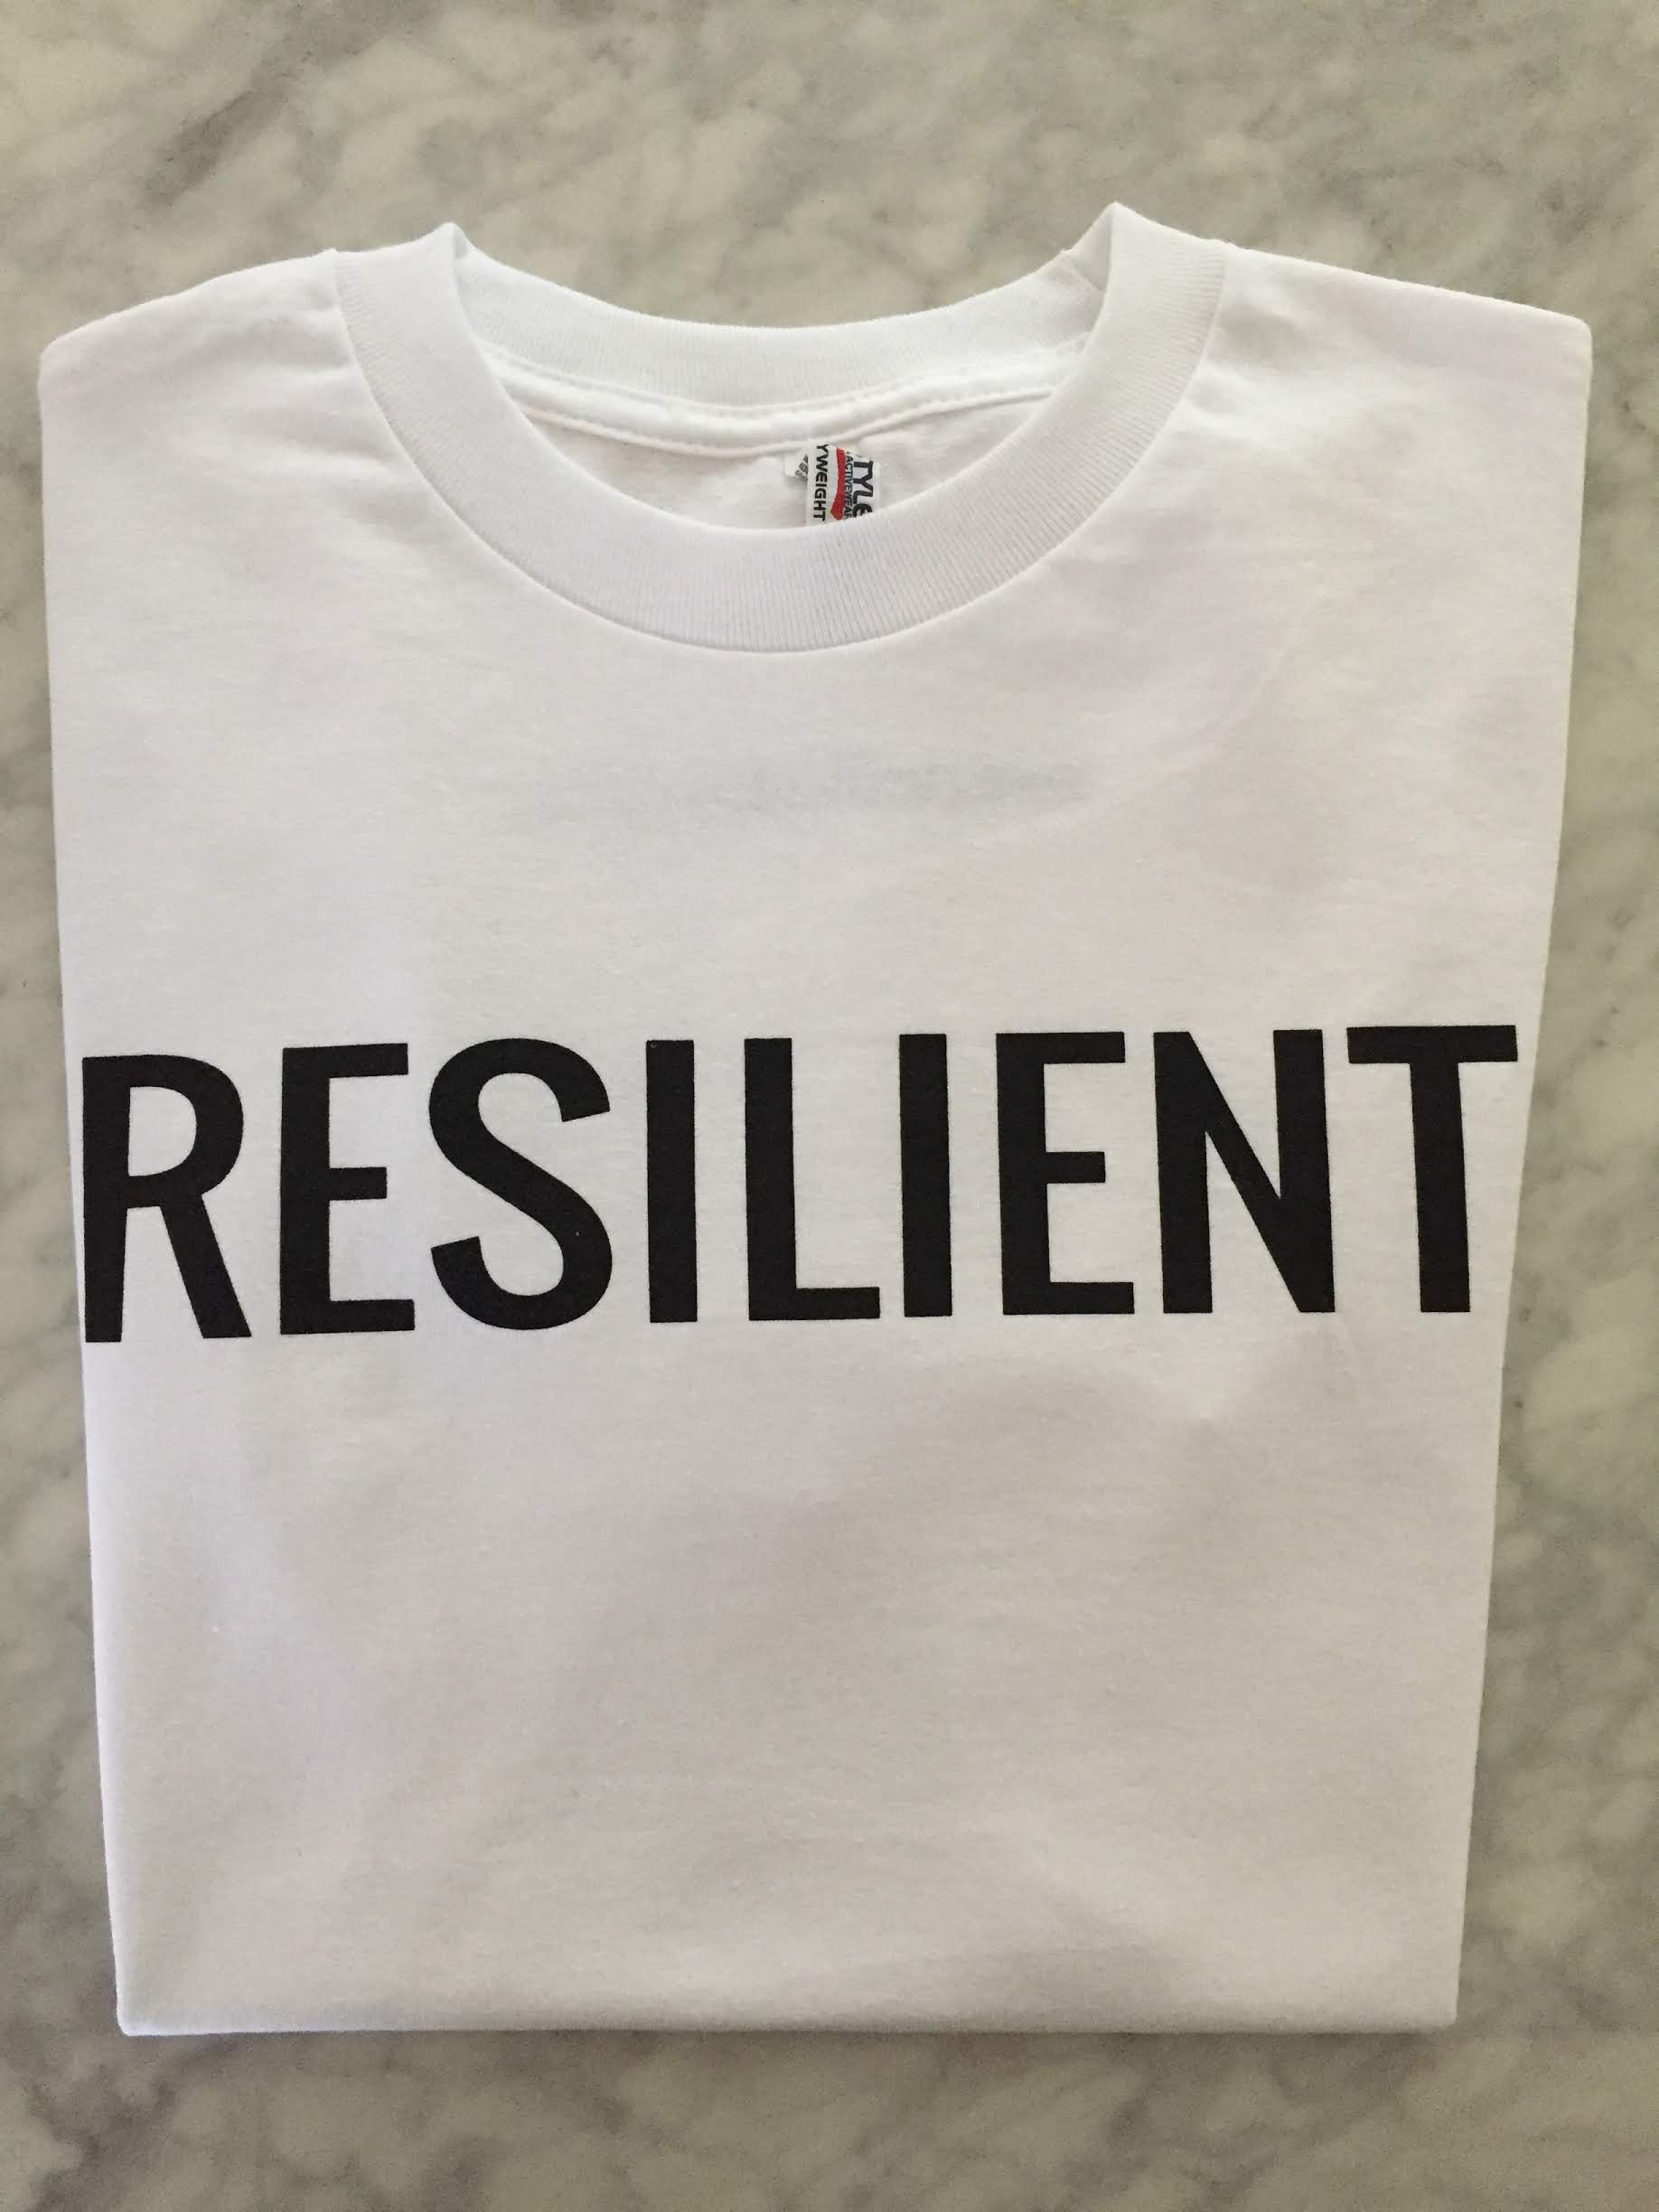 RESILIENT tshirts from RESILIENT PEOPLE